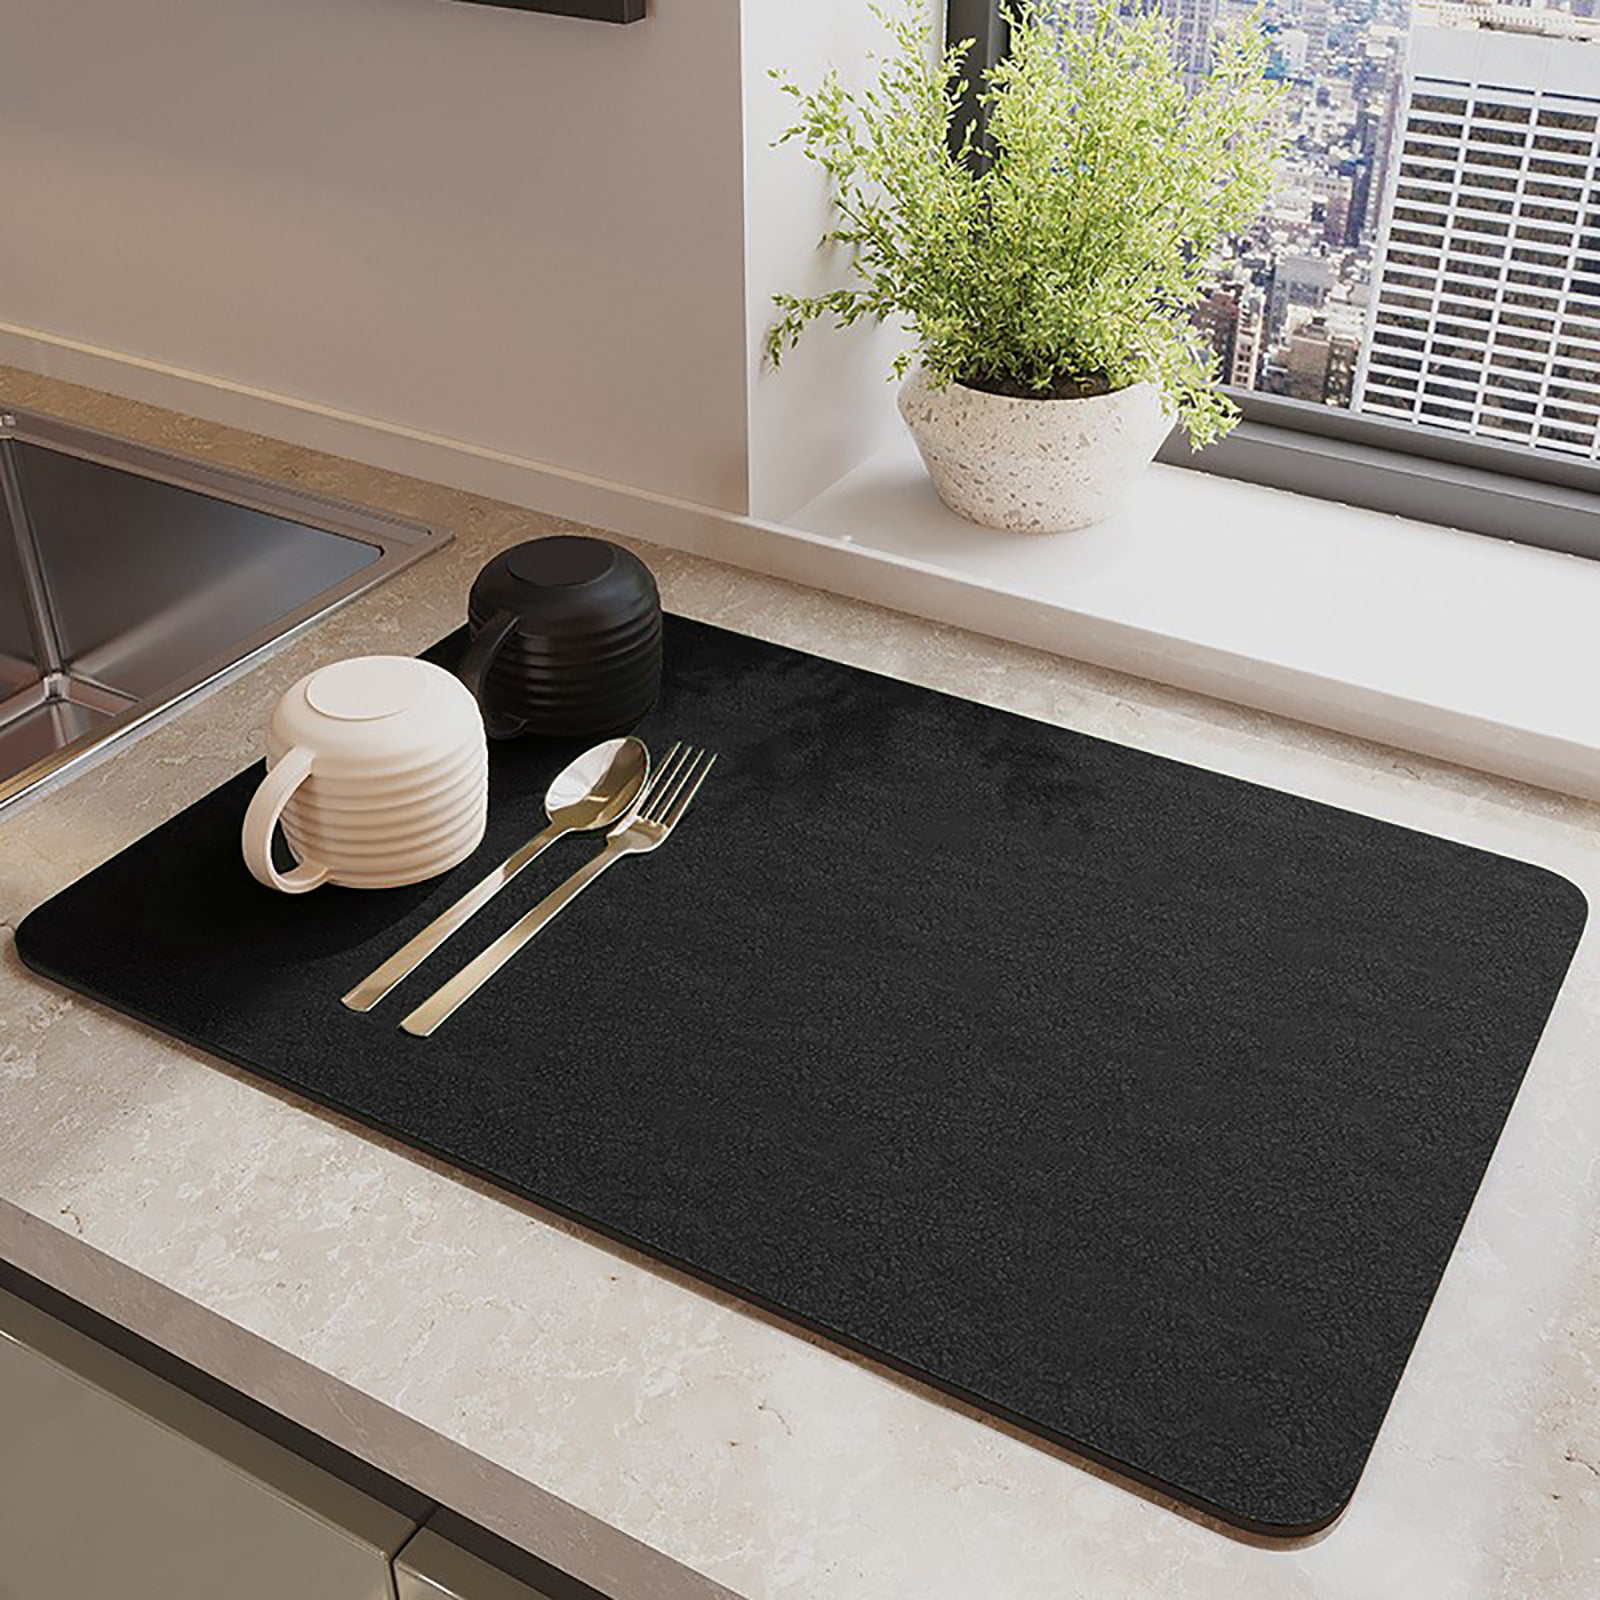  Coffee Mat - Countertop Mat for Coffee Station Bar Mats,  19x13in Hide Stain Rubber Backed Absorbent Dish Drying Mat for Kitchen  Counter Fit Under Coffee Maker Machine (grey): Home & Kitchen